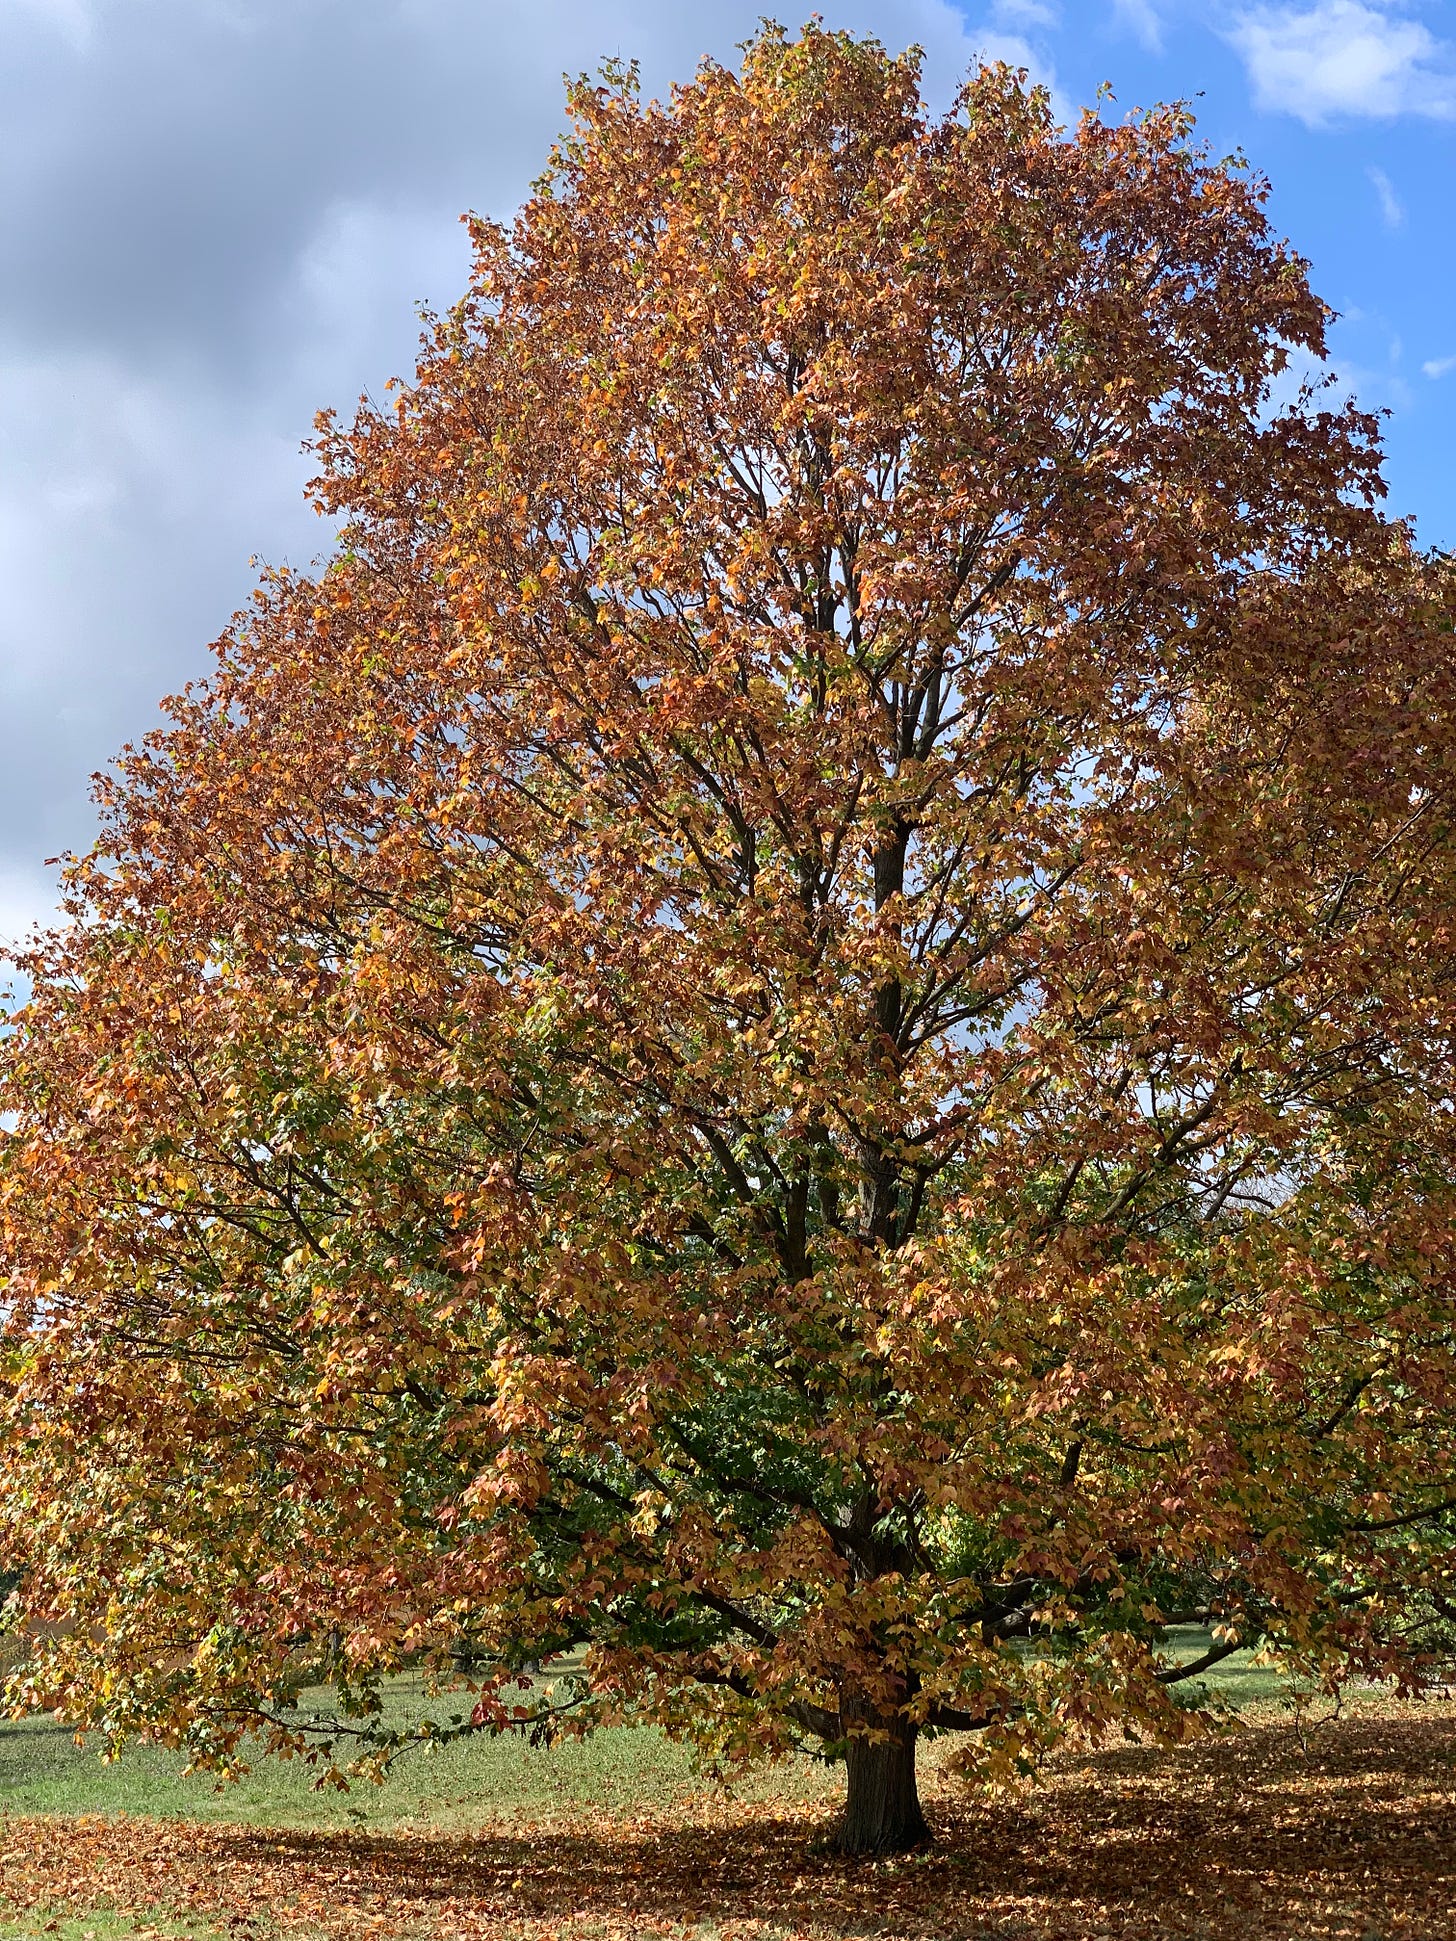 A wide, shapely tree with leaves that have turned golden to brown.